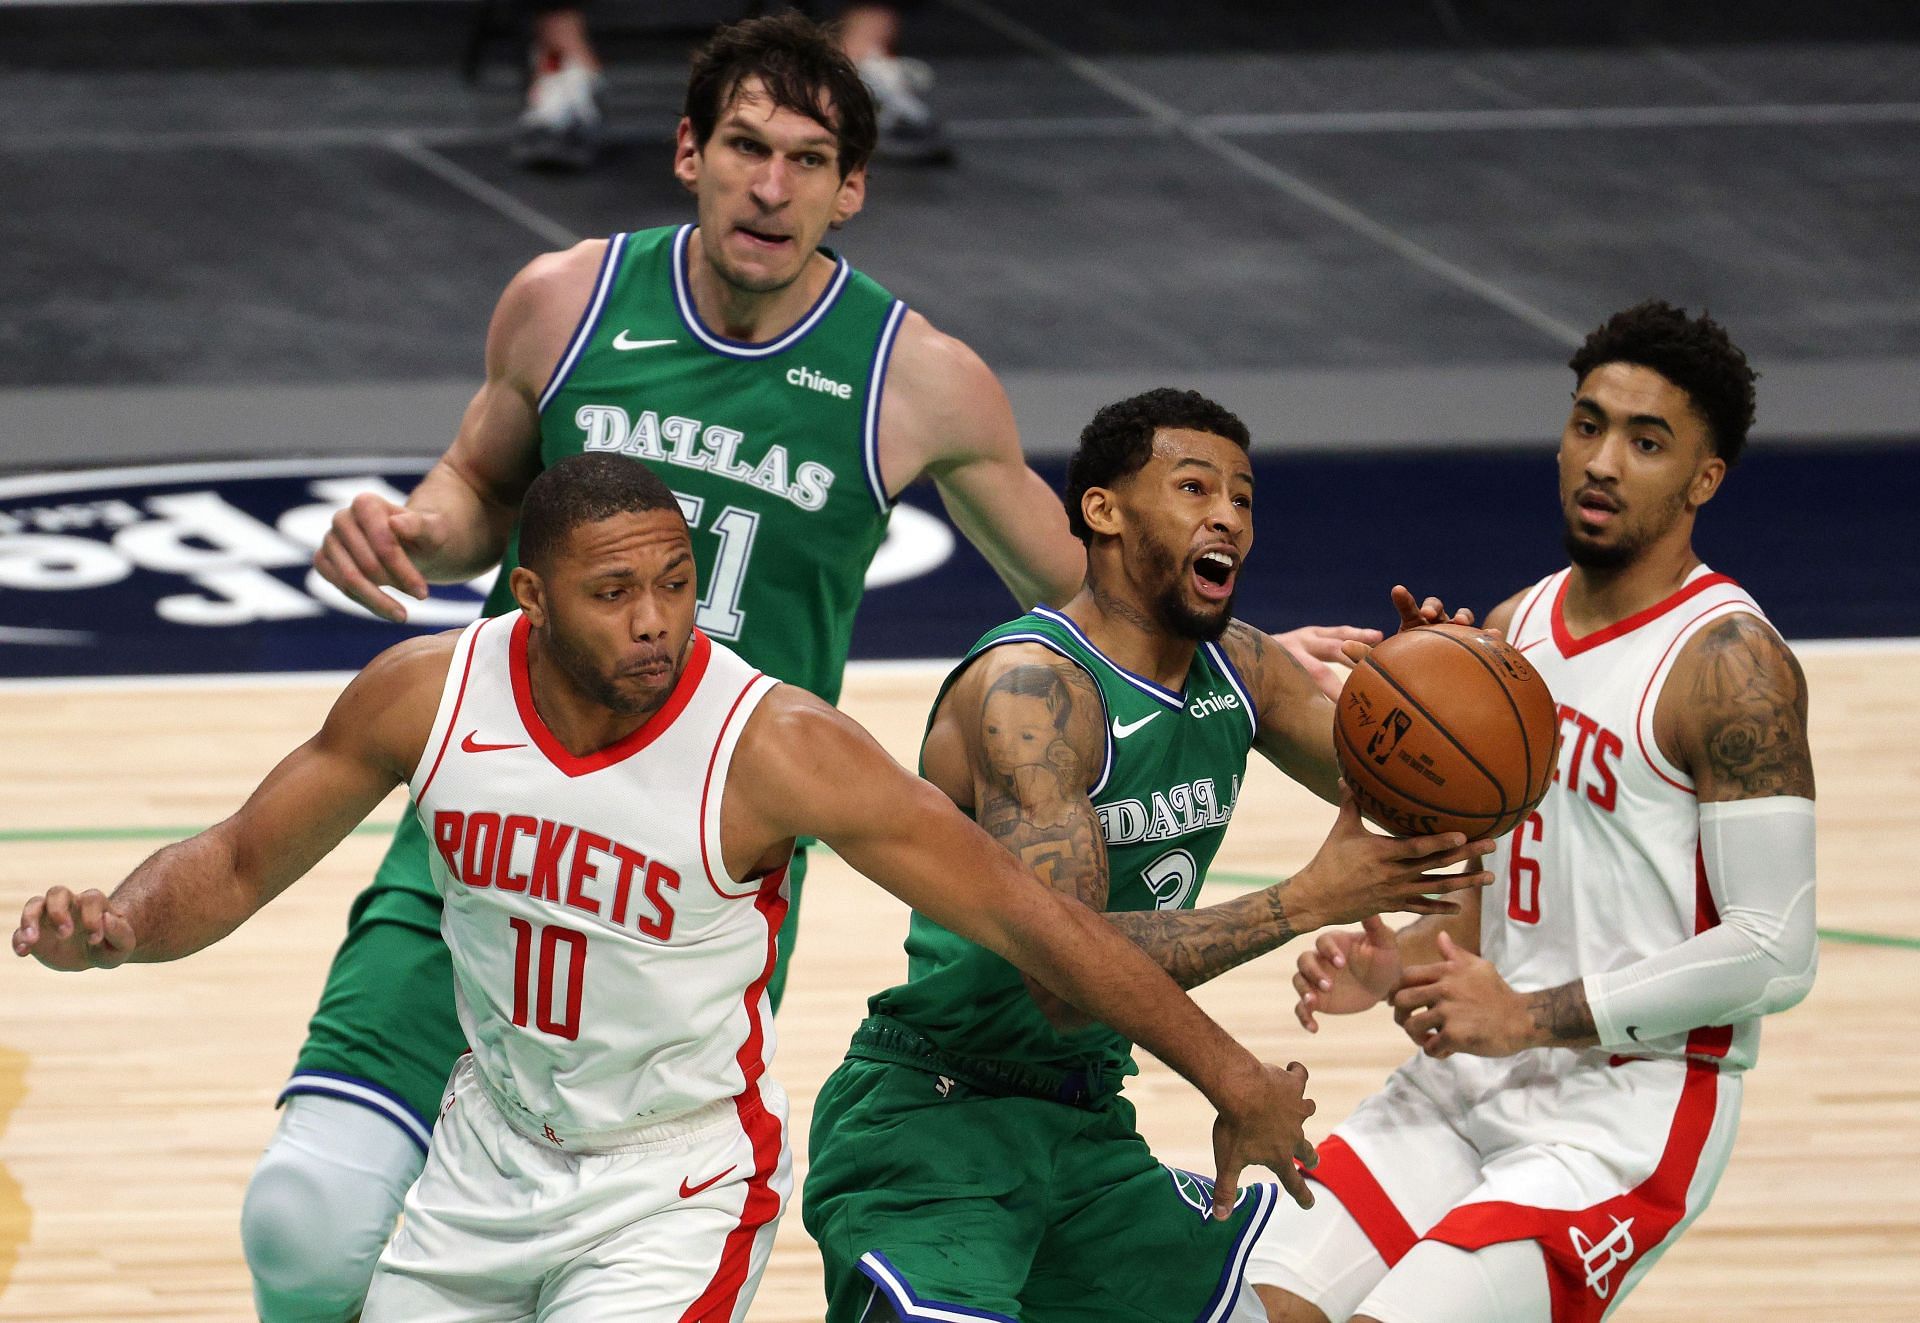 The Houston Rockets and the Dallas Mavericks will face off at the American Airlines Center on Tuesday